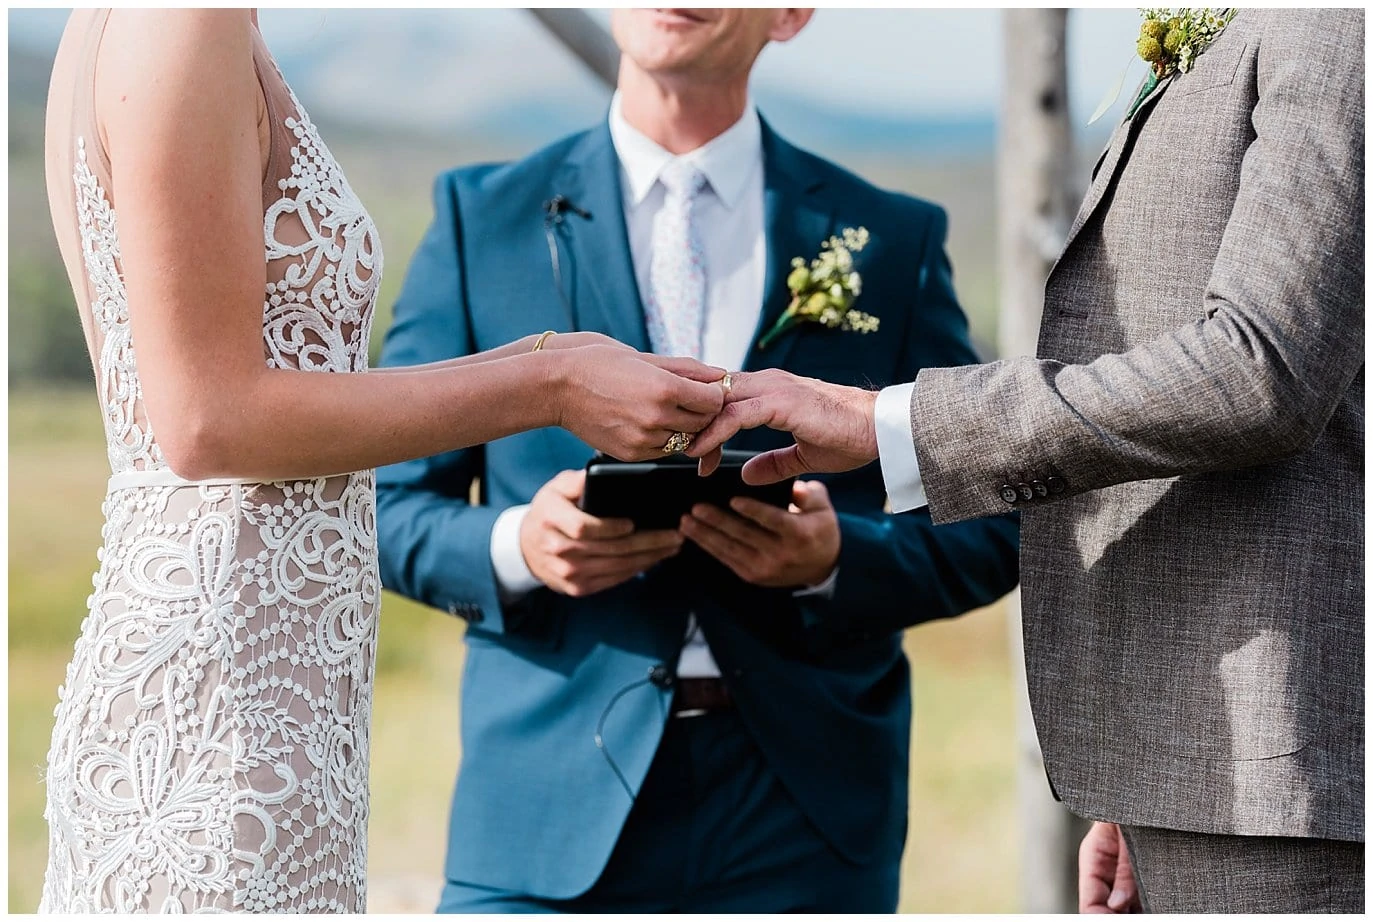 ring exchange bride in nude and lace dress, groom in tweed suit photo